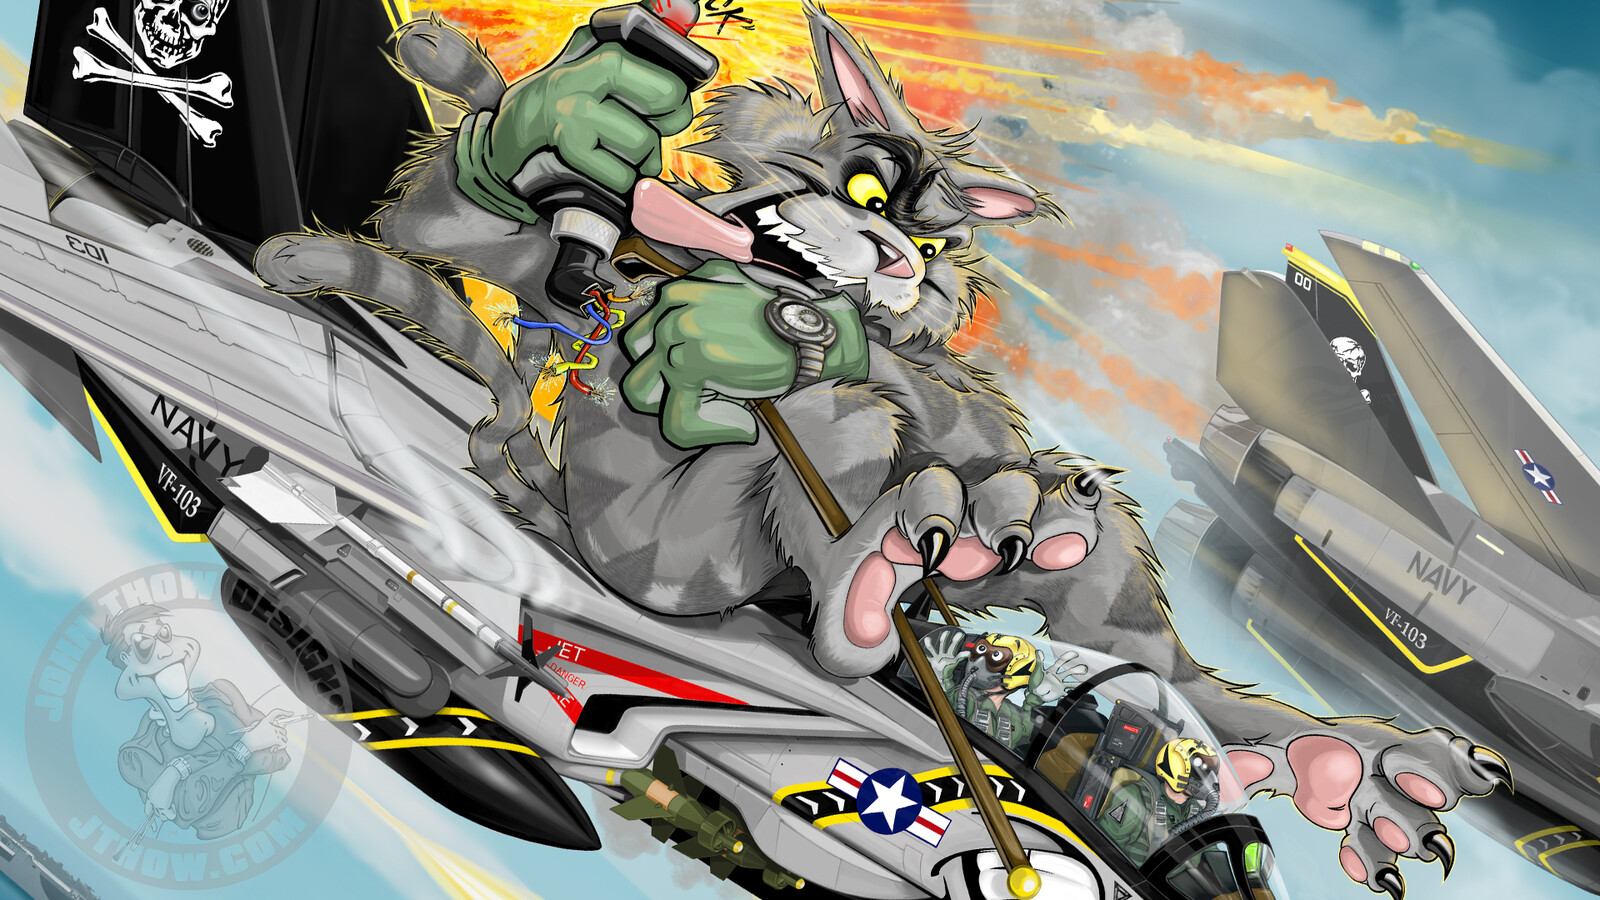 "Anytime Baby" Tomcat character detail